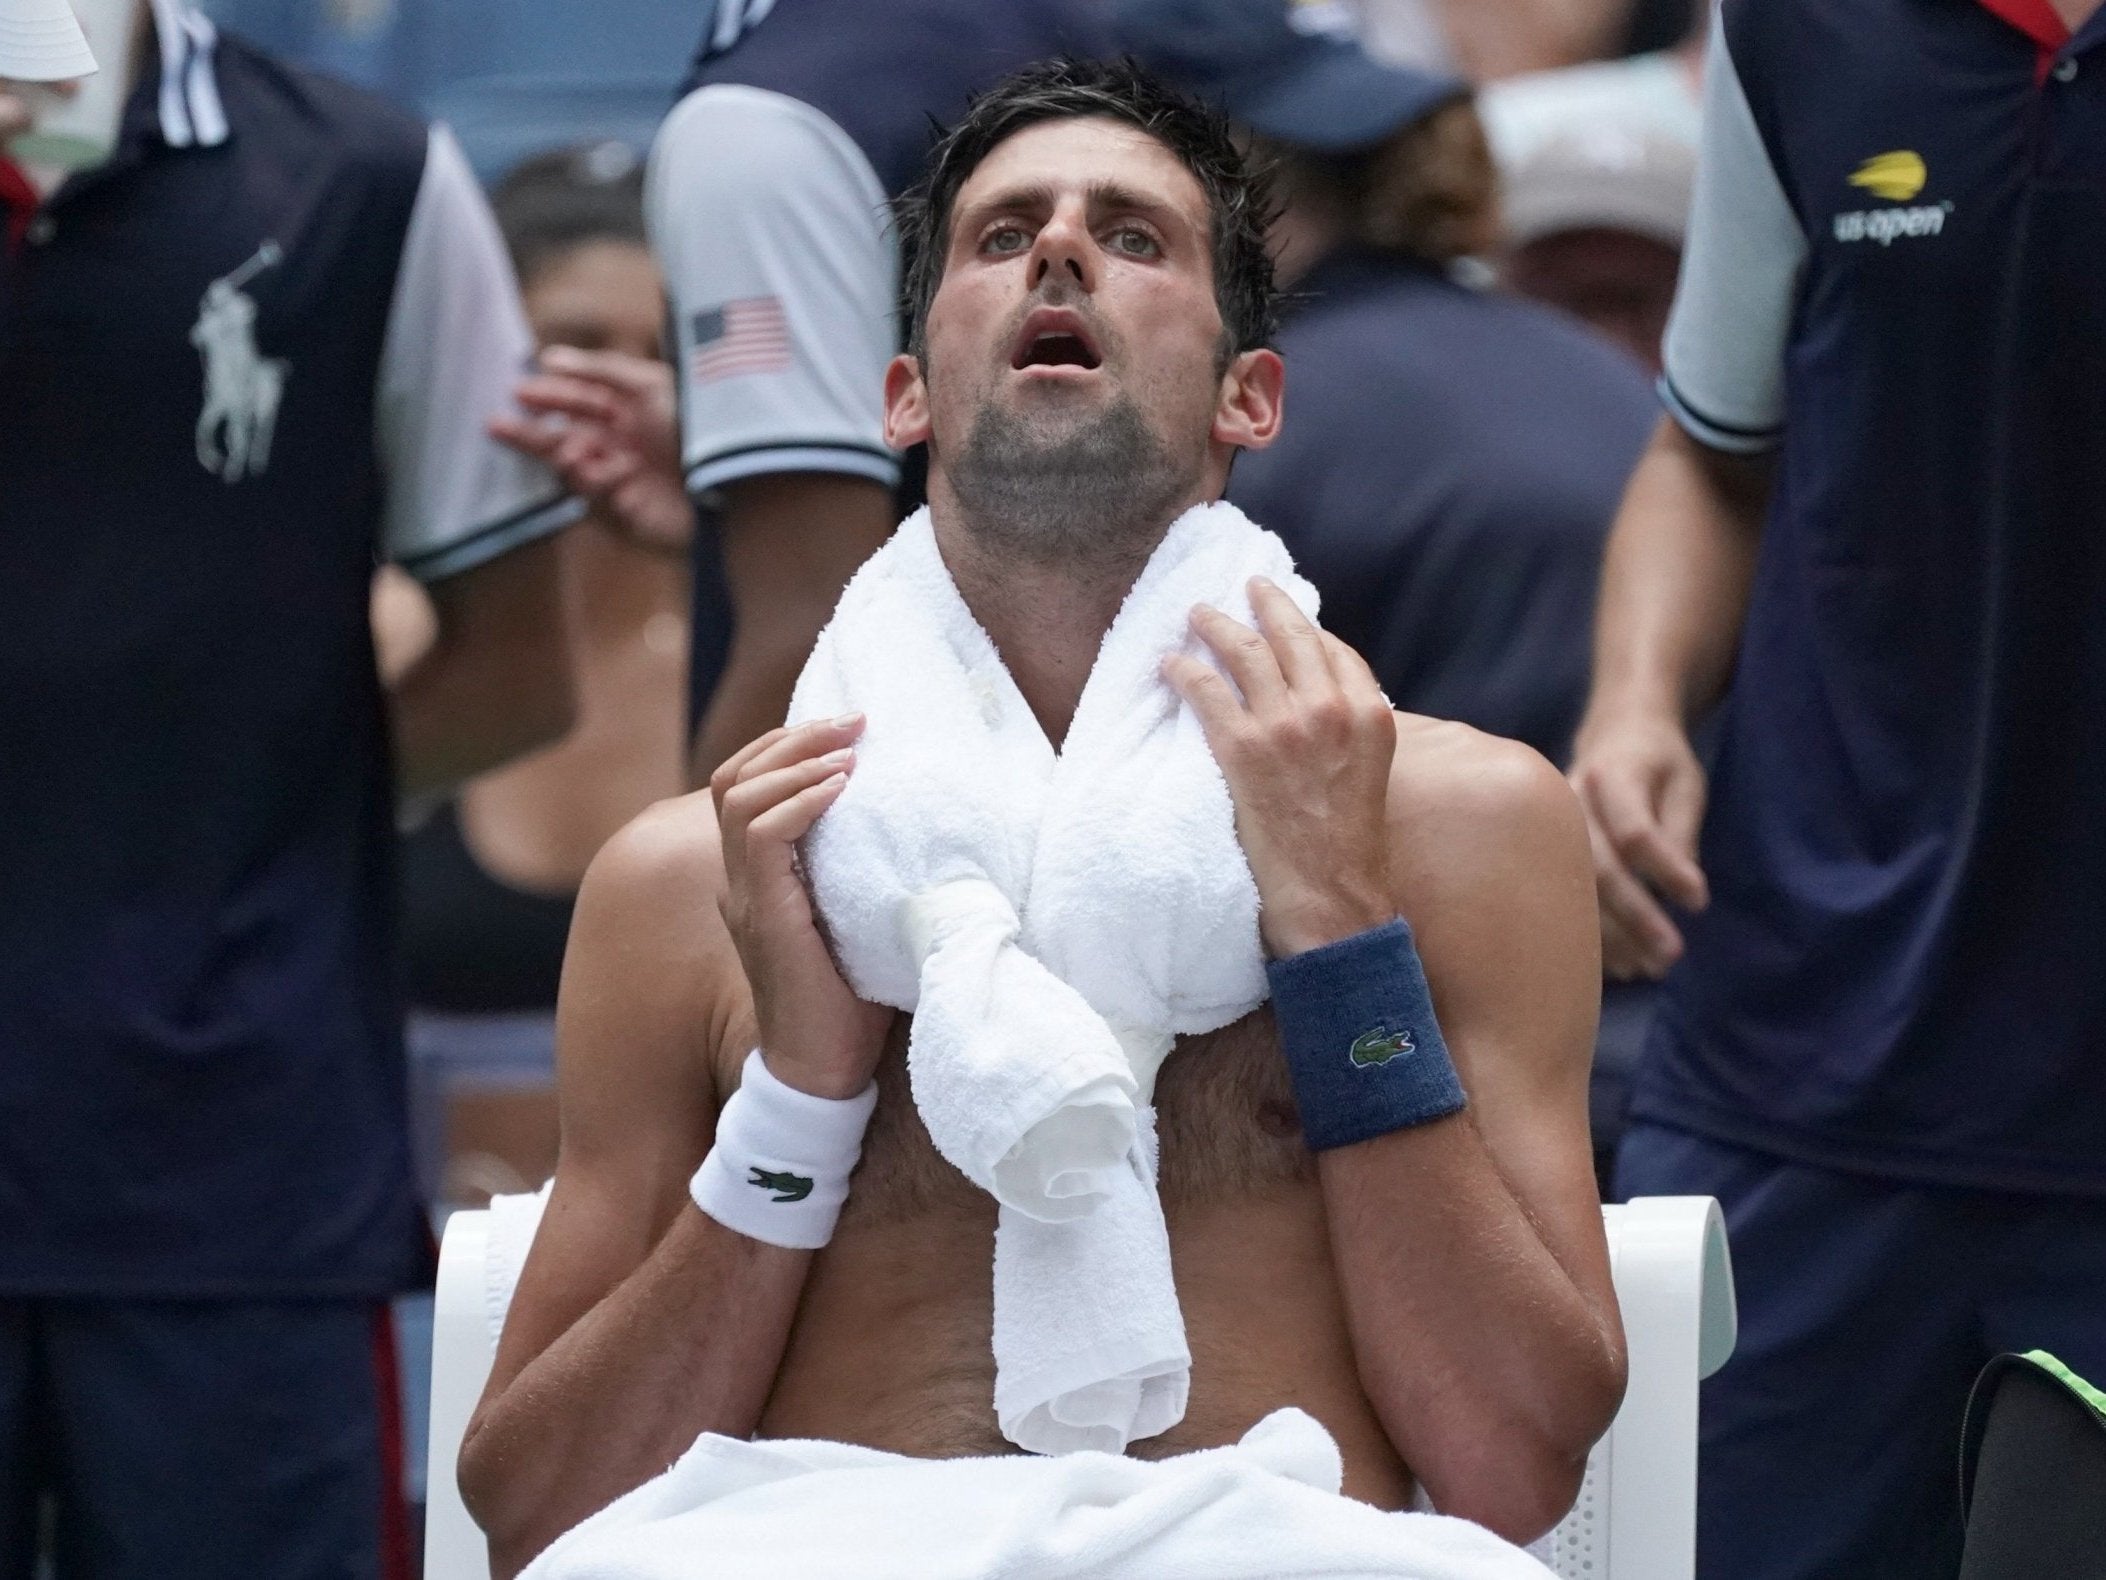 Under the regulations Novak Djokovic was able to sit topless for a number of minutes without sanction